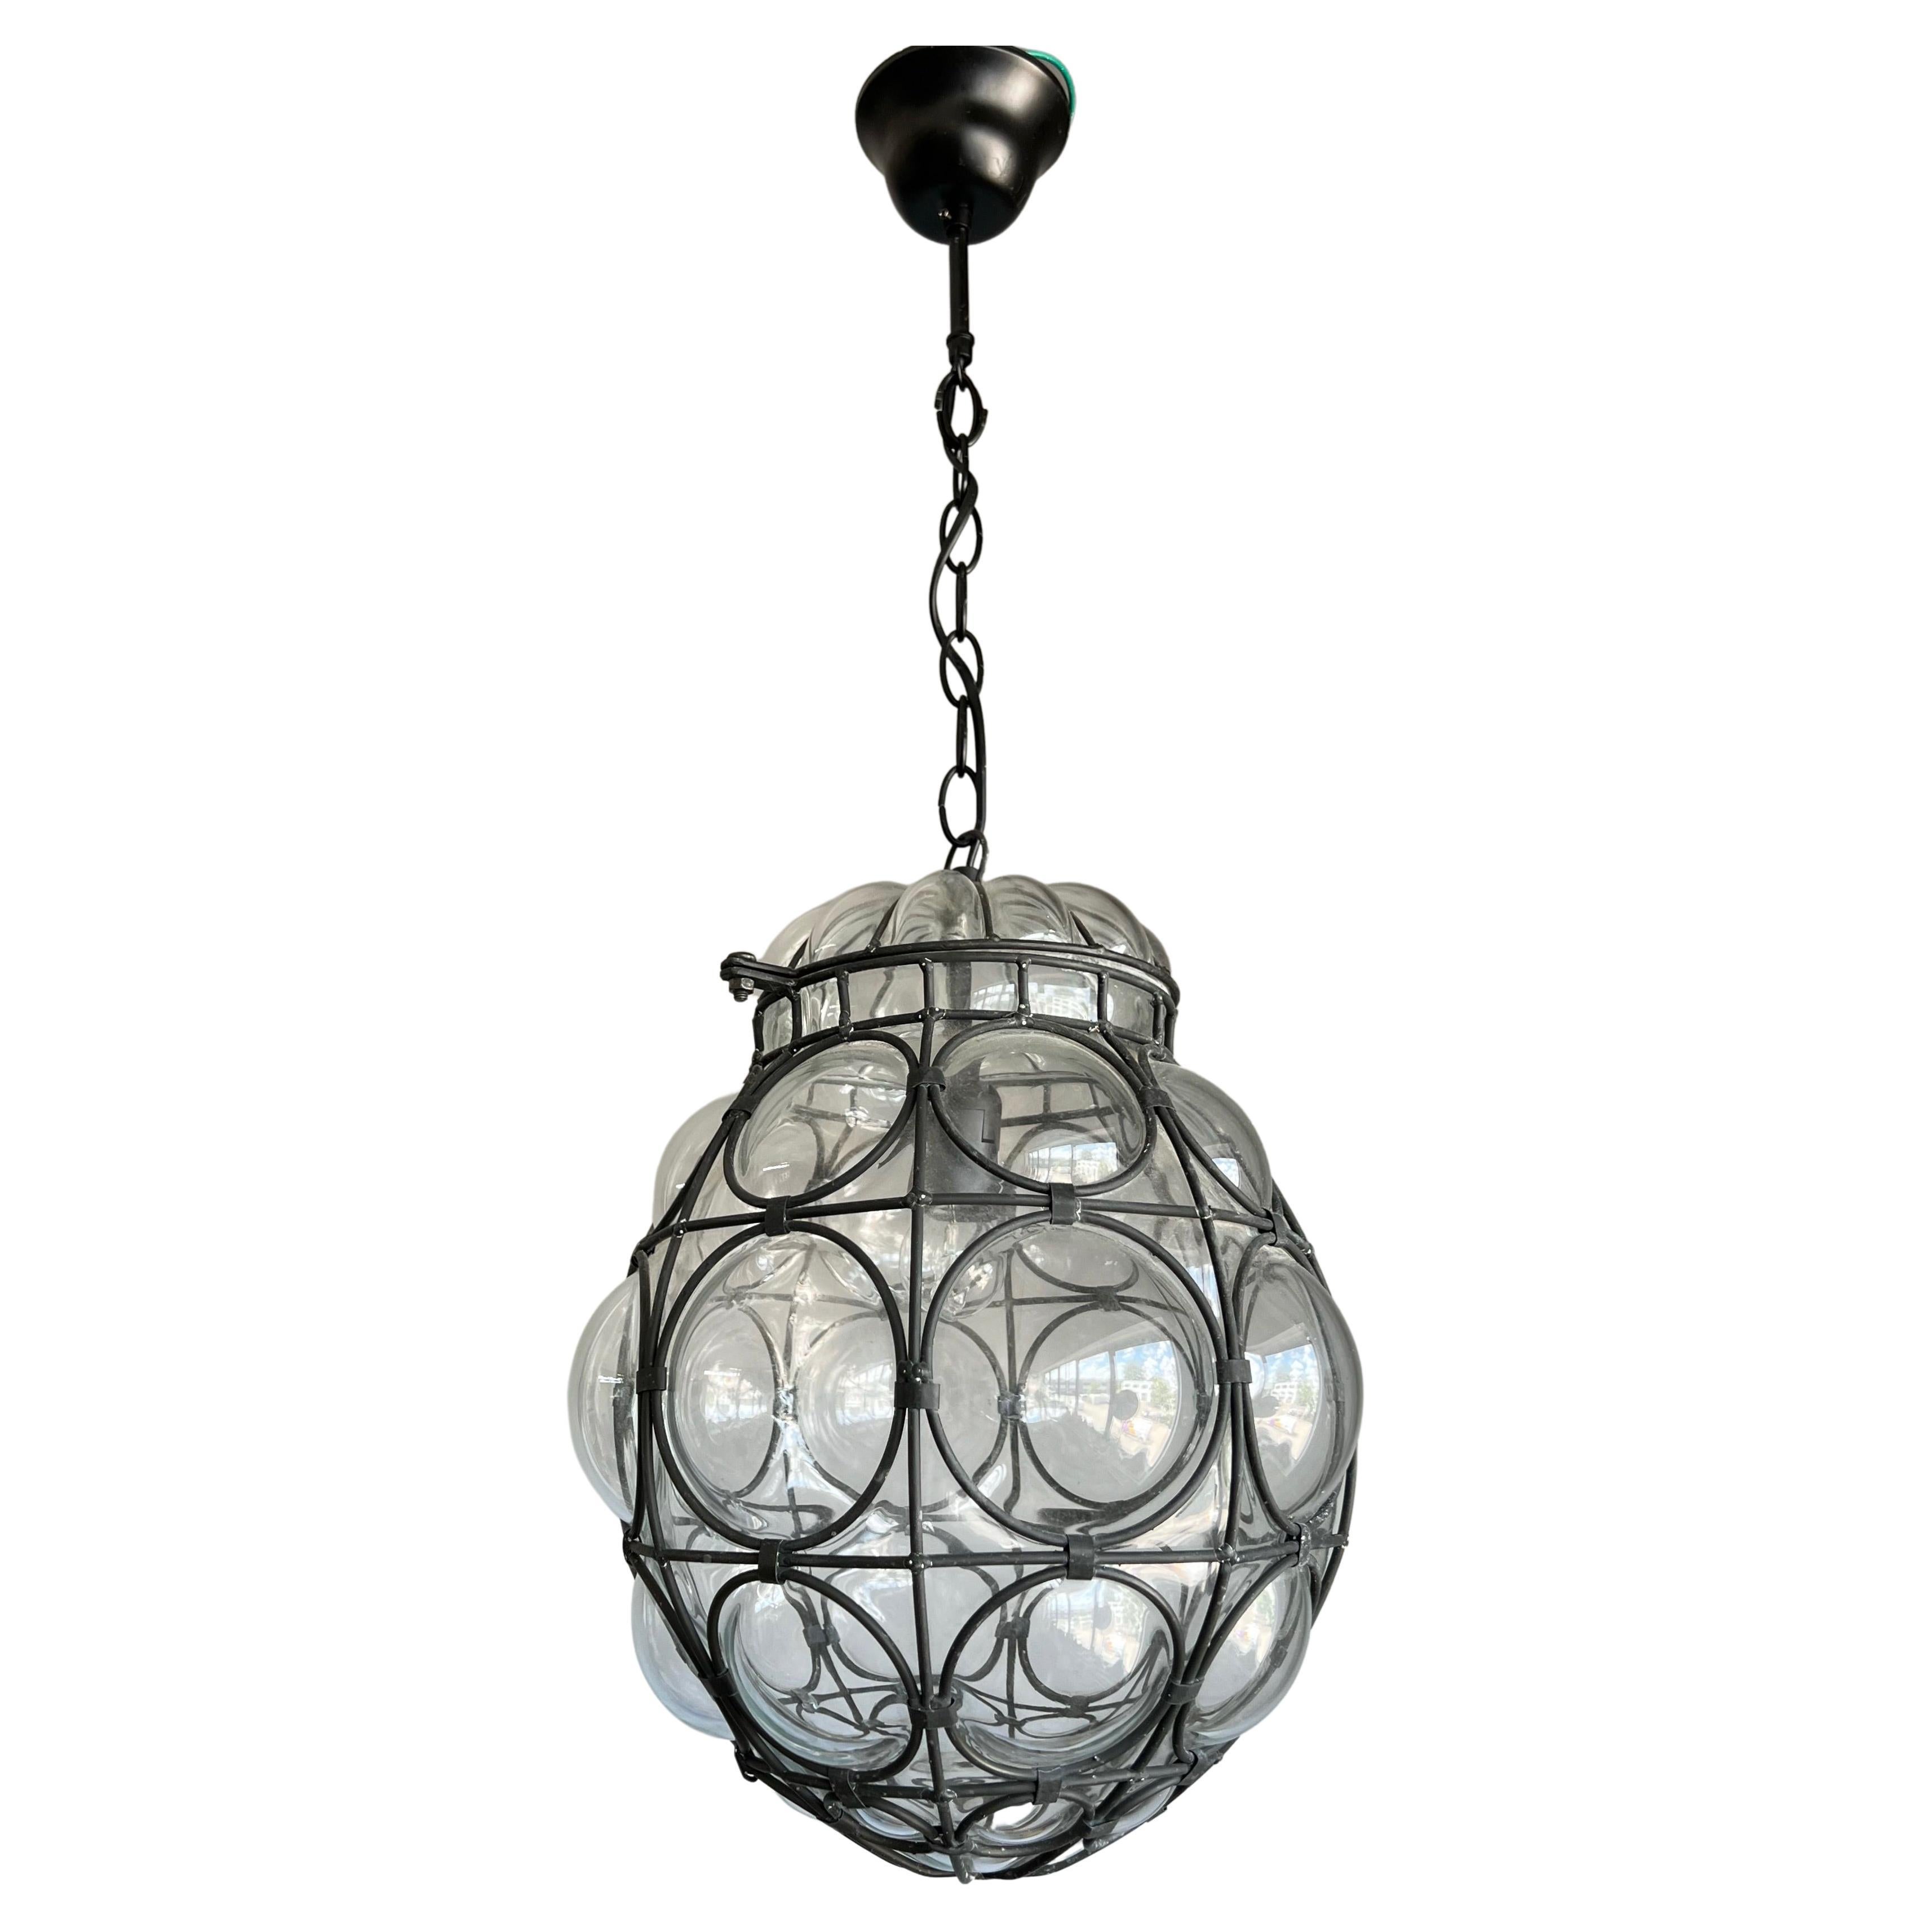 Good Size Venetian Mouth Blown Glass in Hand-Crafted Metal Frame Pendant Light For Sale